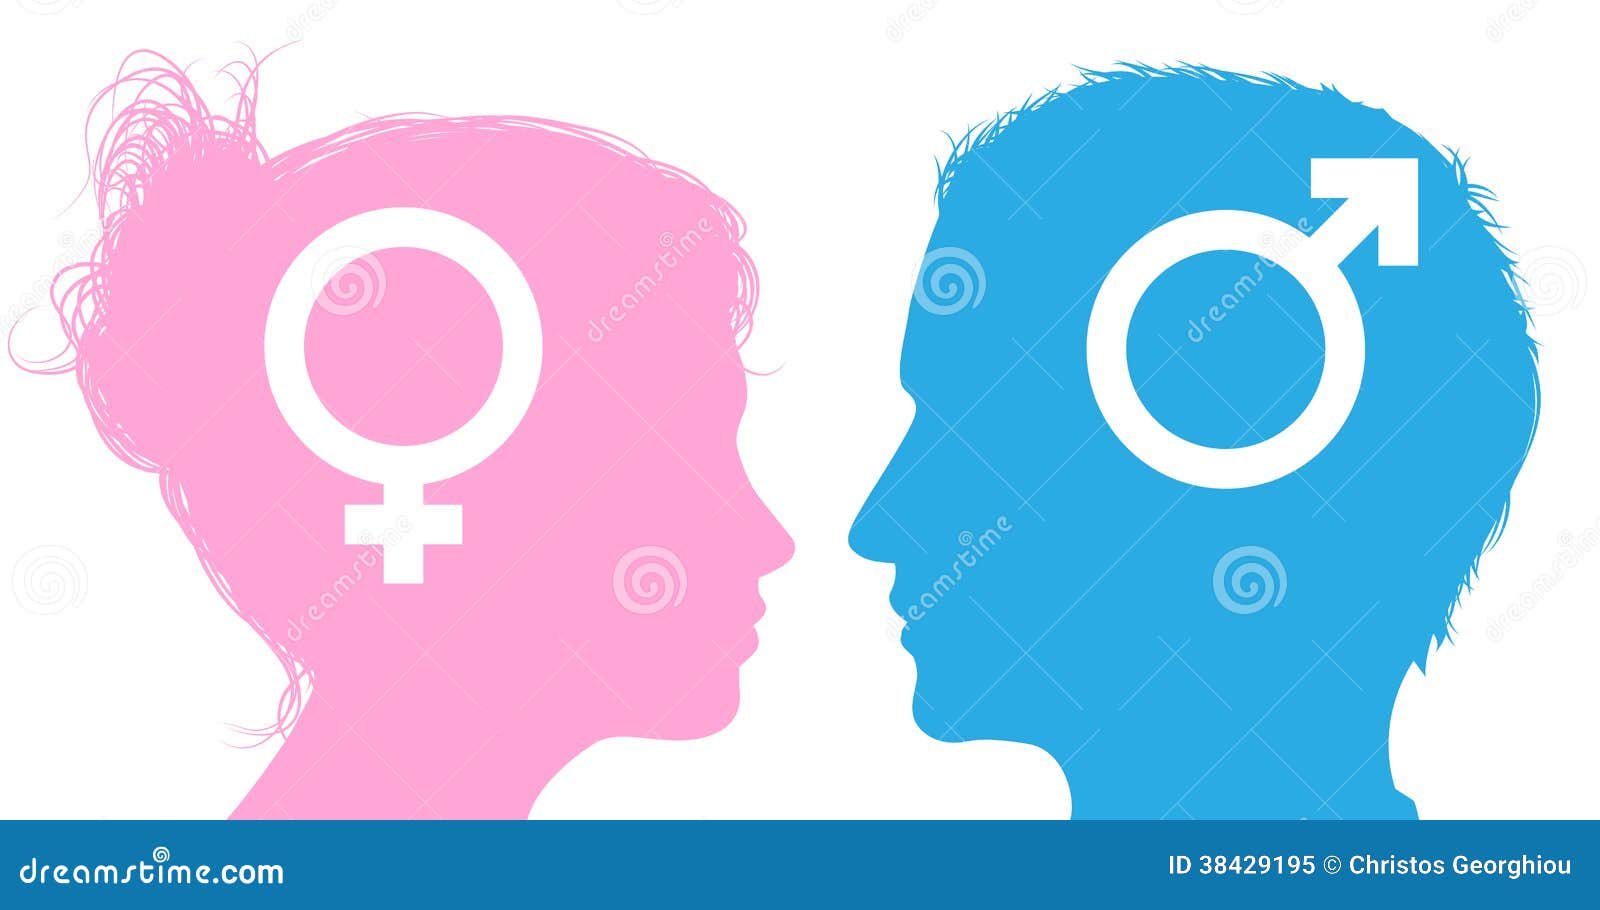 man and woman heads talking